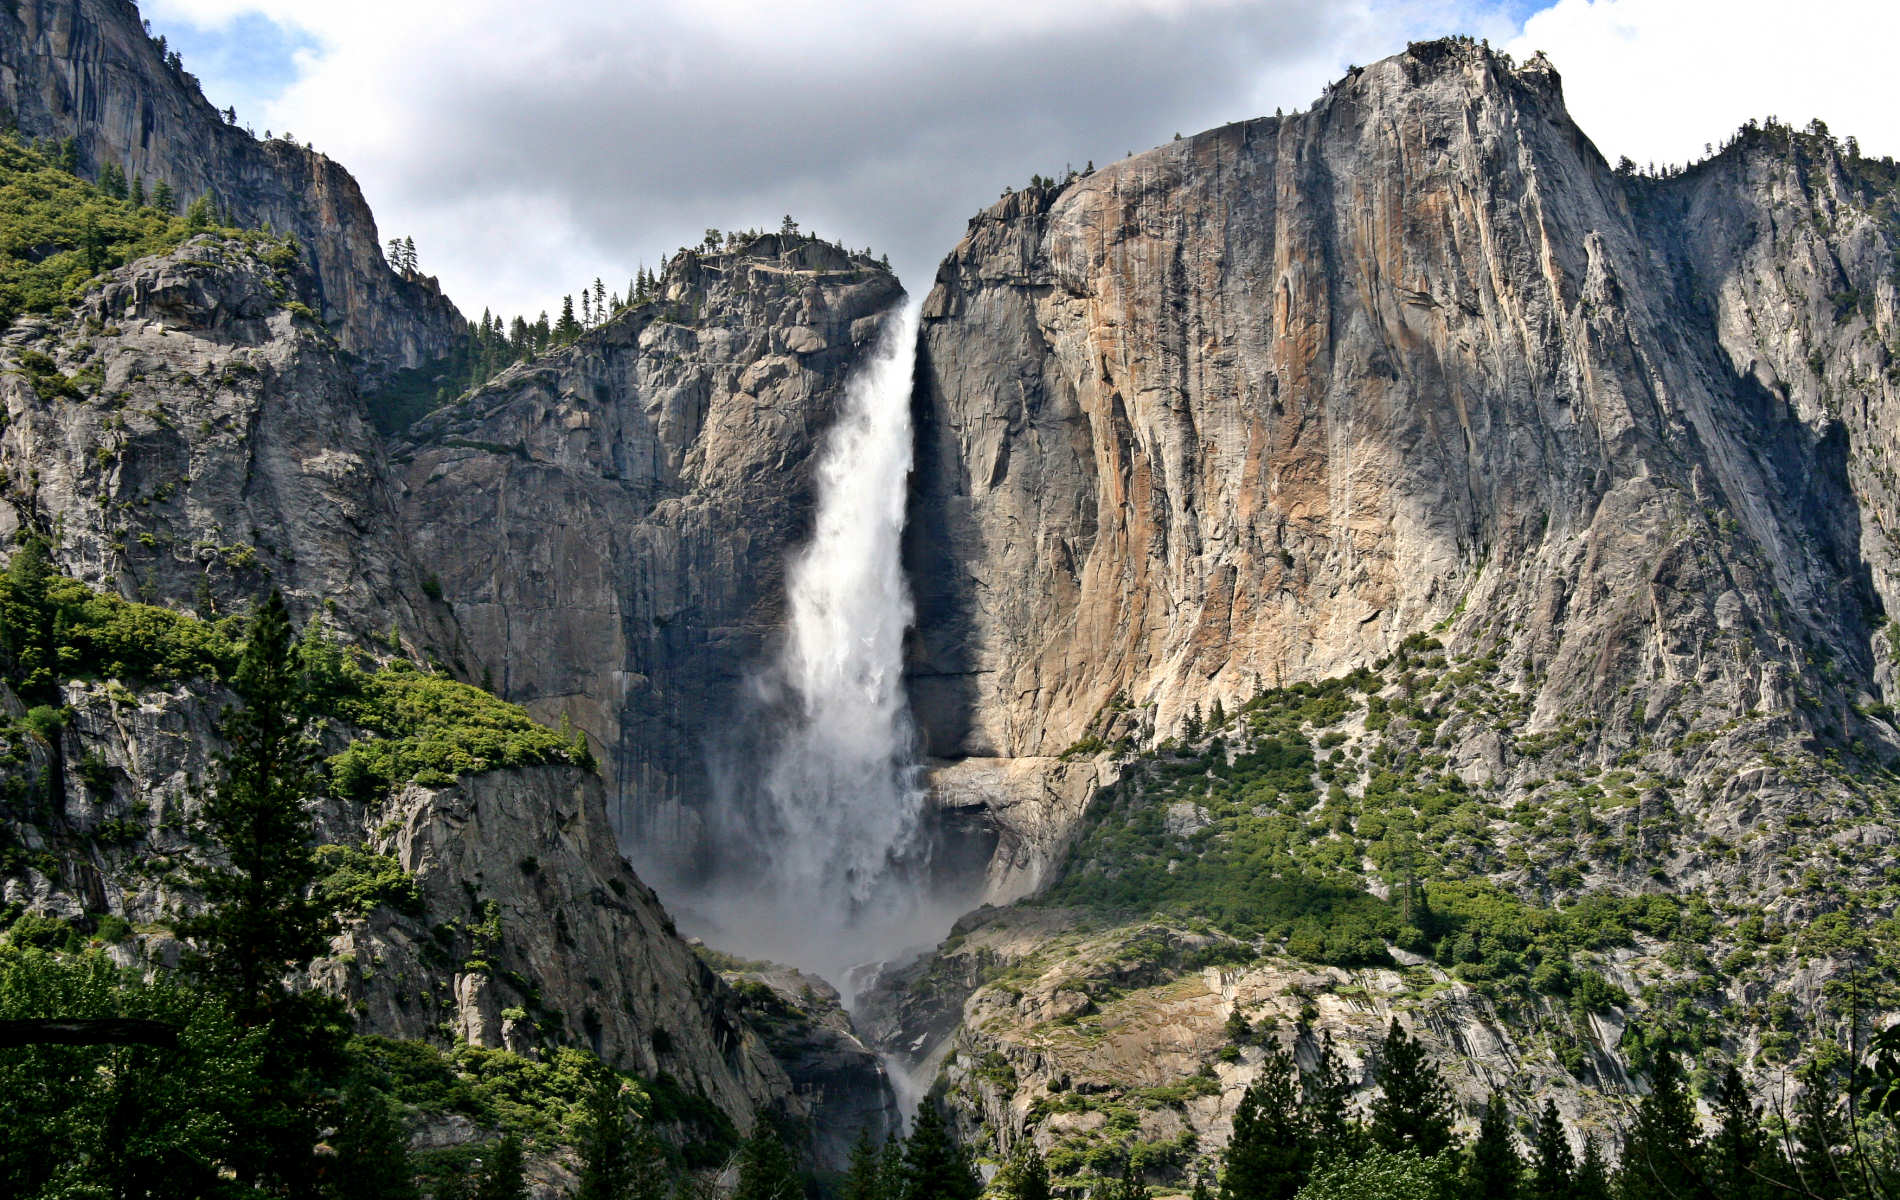 Top 10 Pictures of Yosemite National Park | Backpaco world explorer